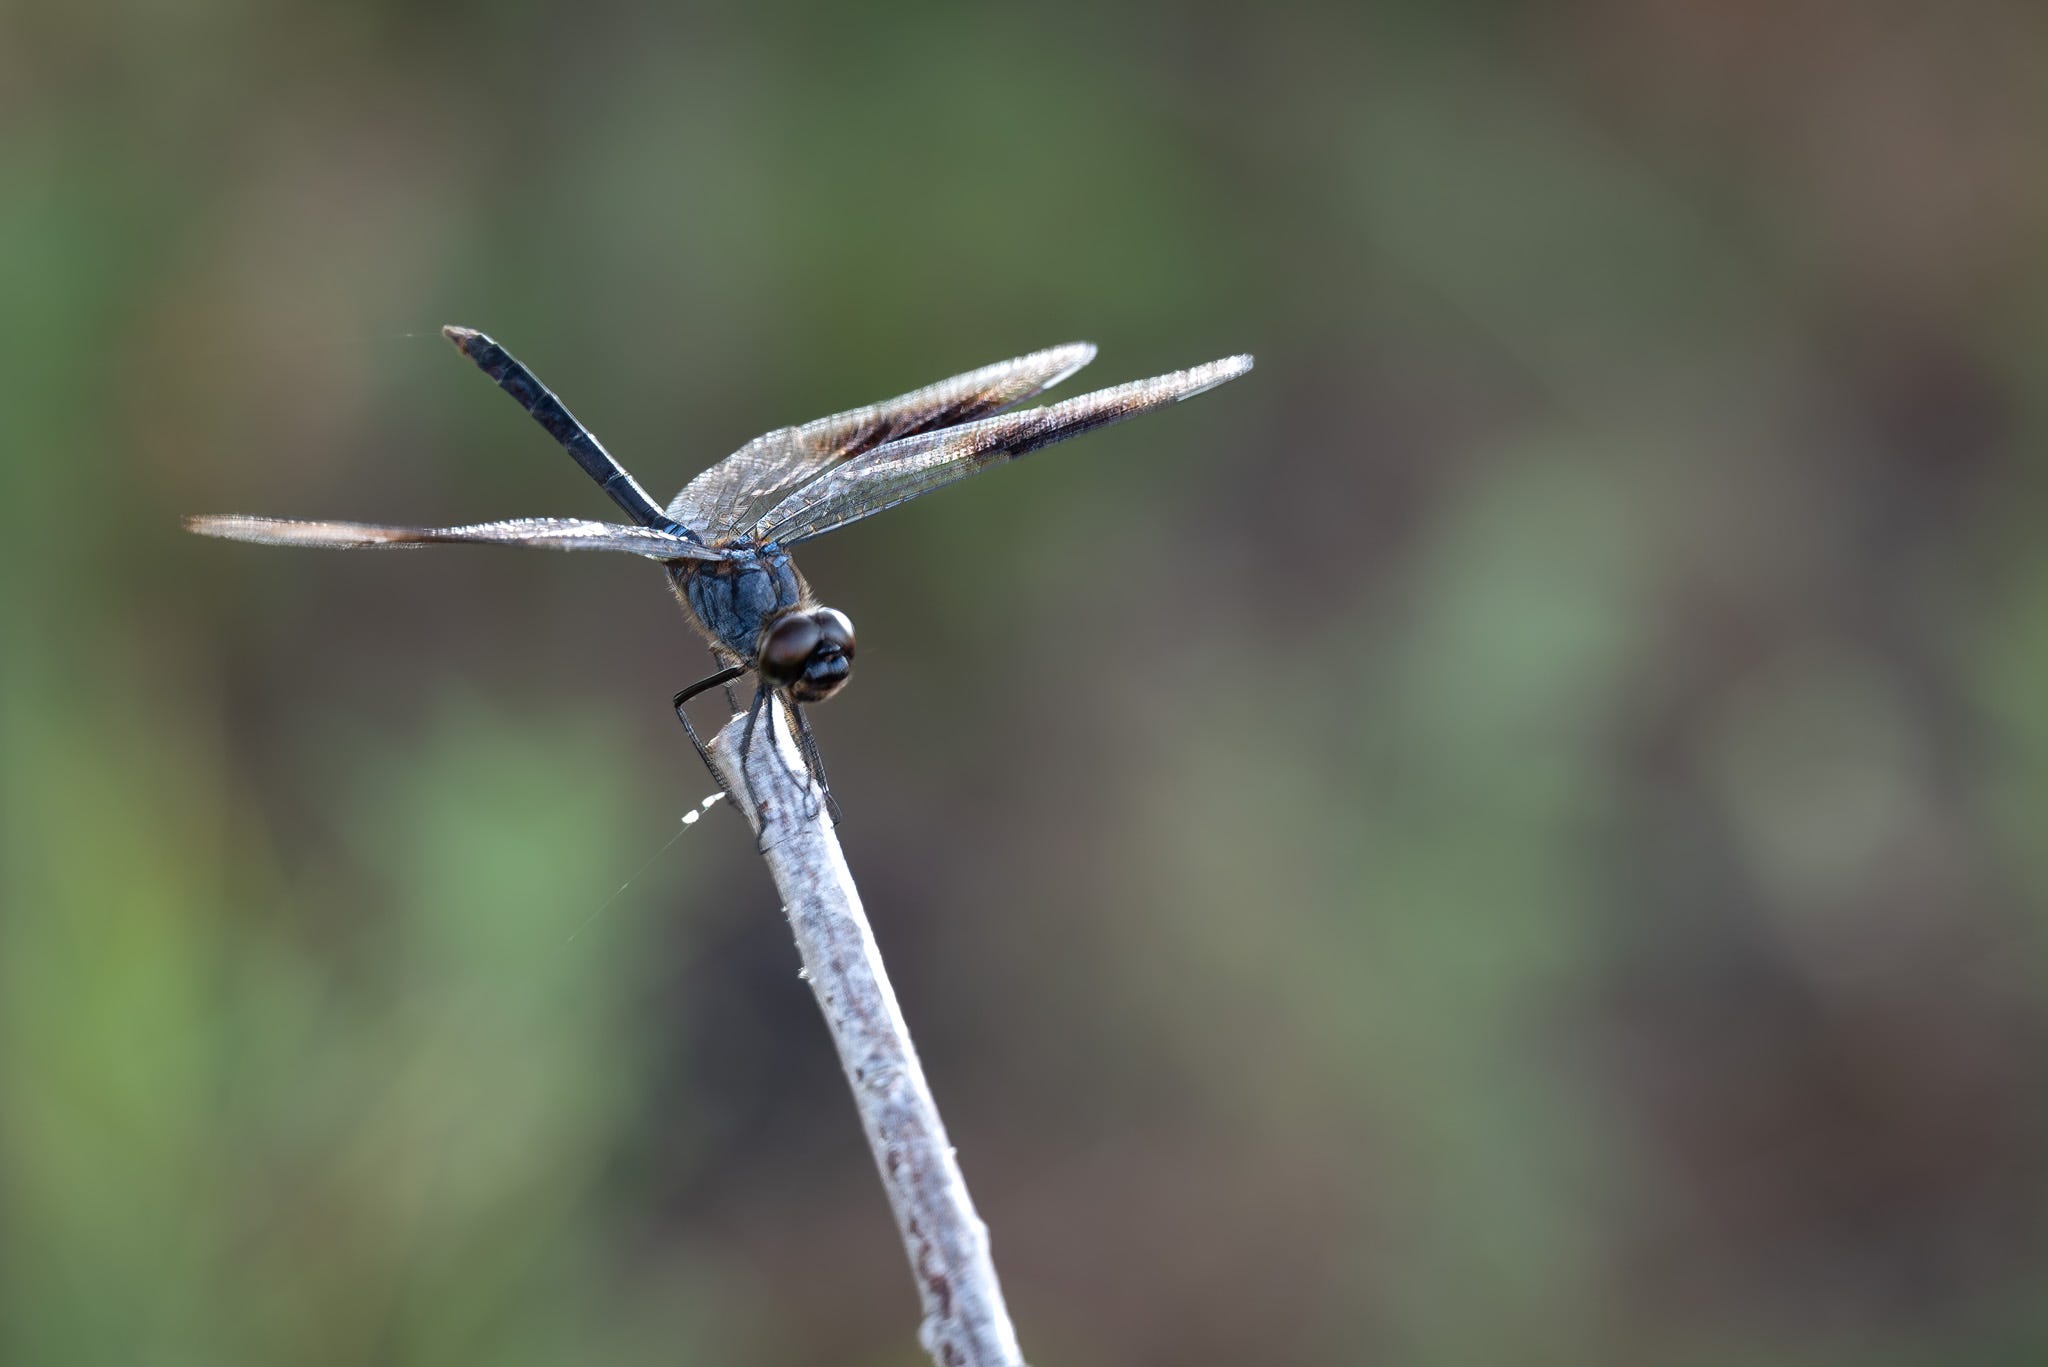 A single dragonfly sitting on the edge of a branch against a blurred background